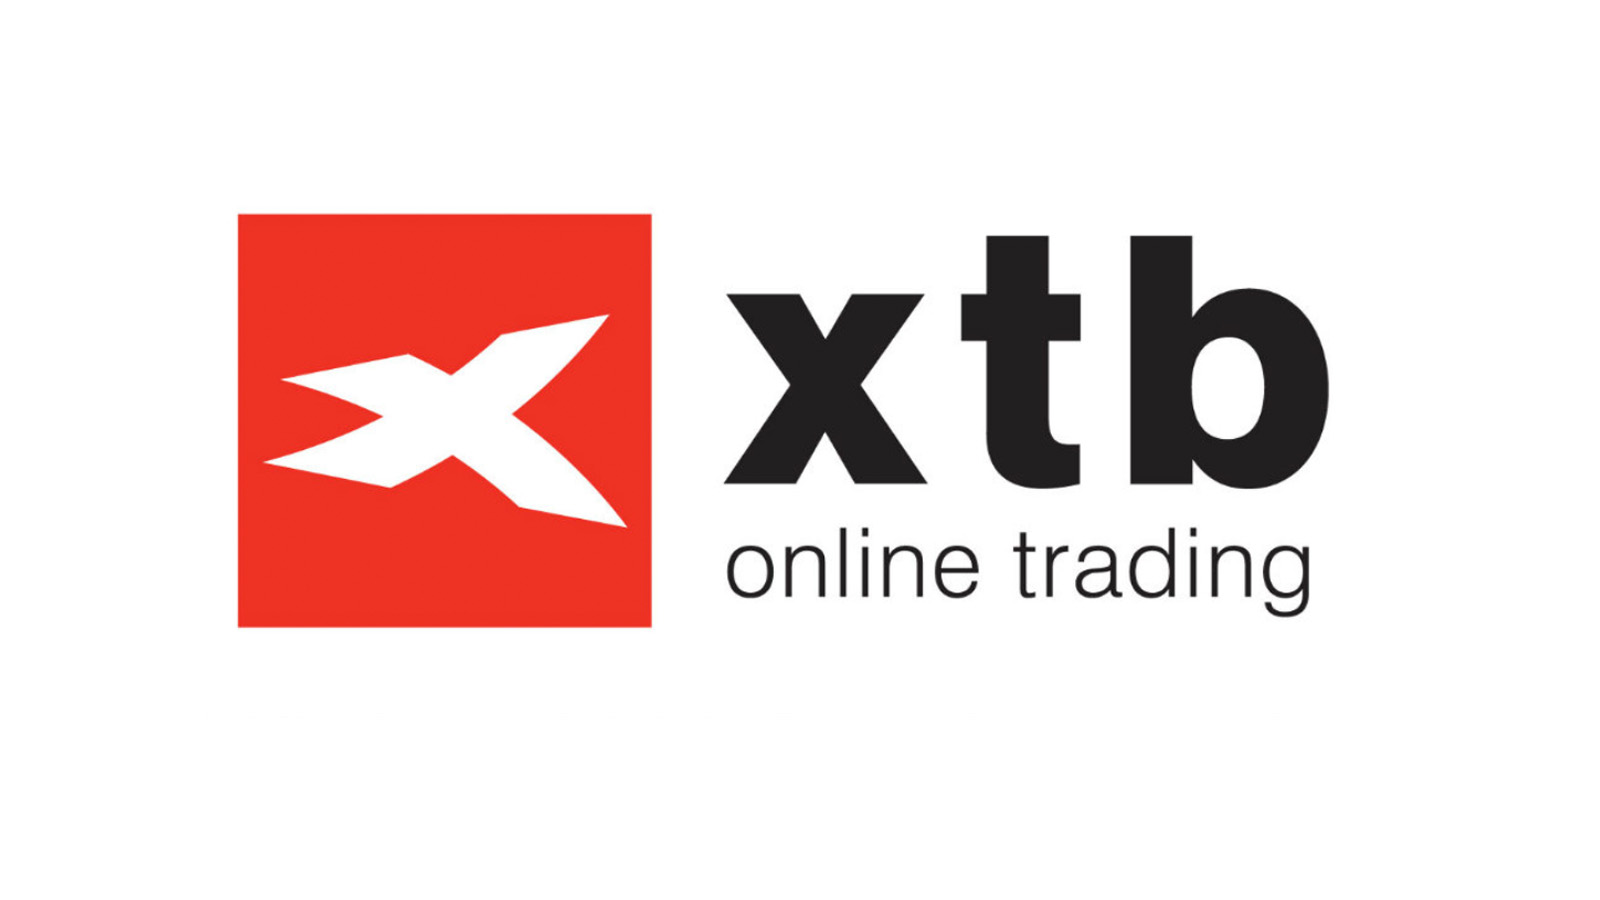 XTB Online Trading - Video presentation about trading